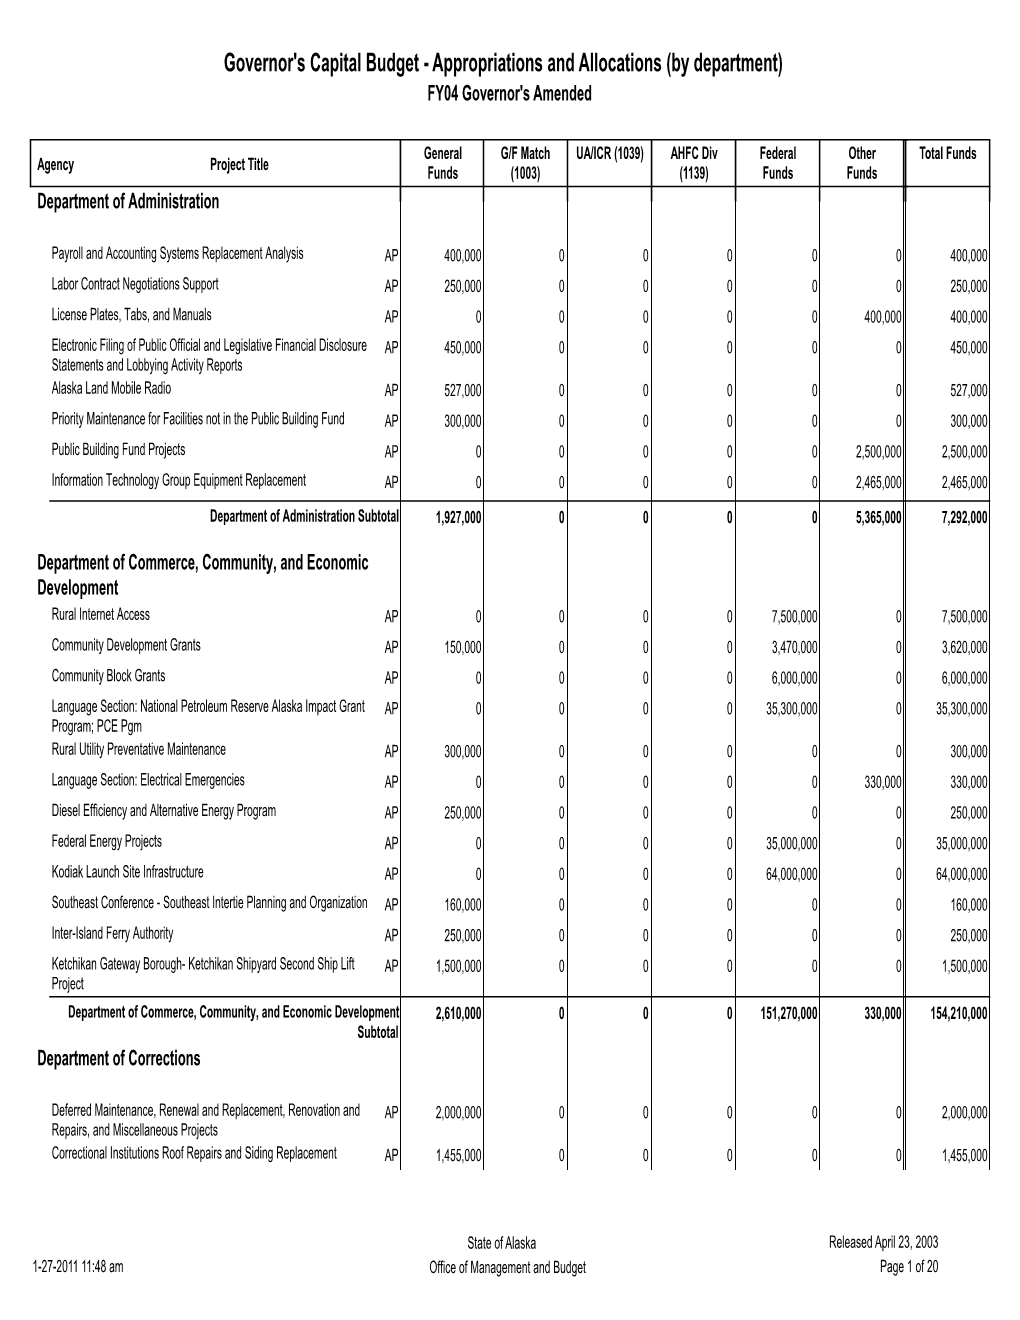 Governor's Capital Budget - Appropriations and Allocations (By Department) FY04 Governor's Amended